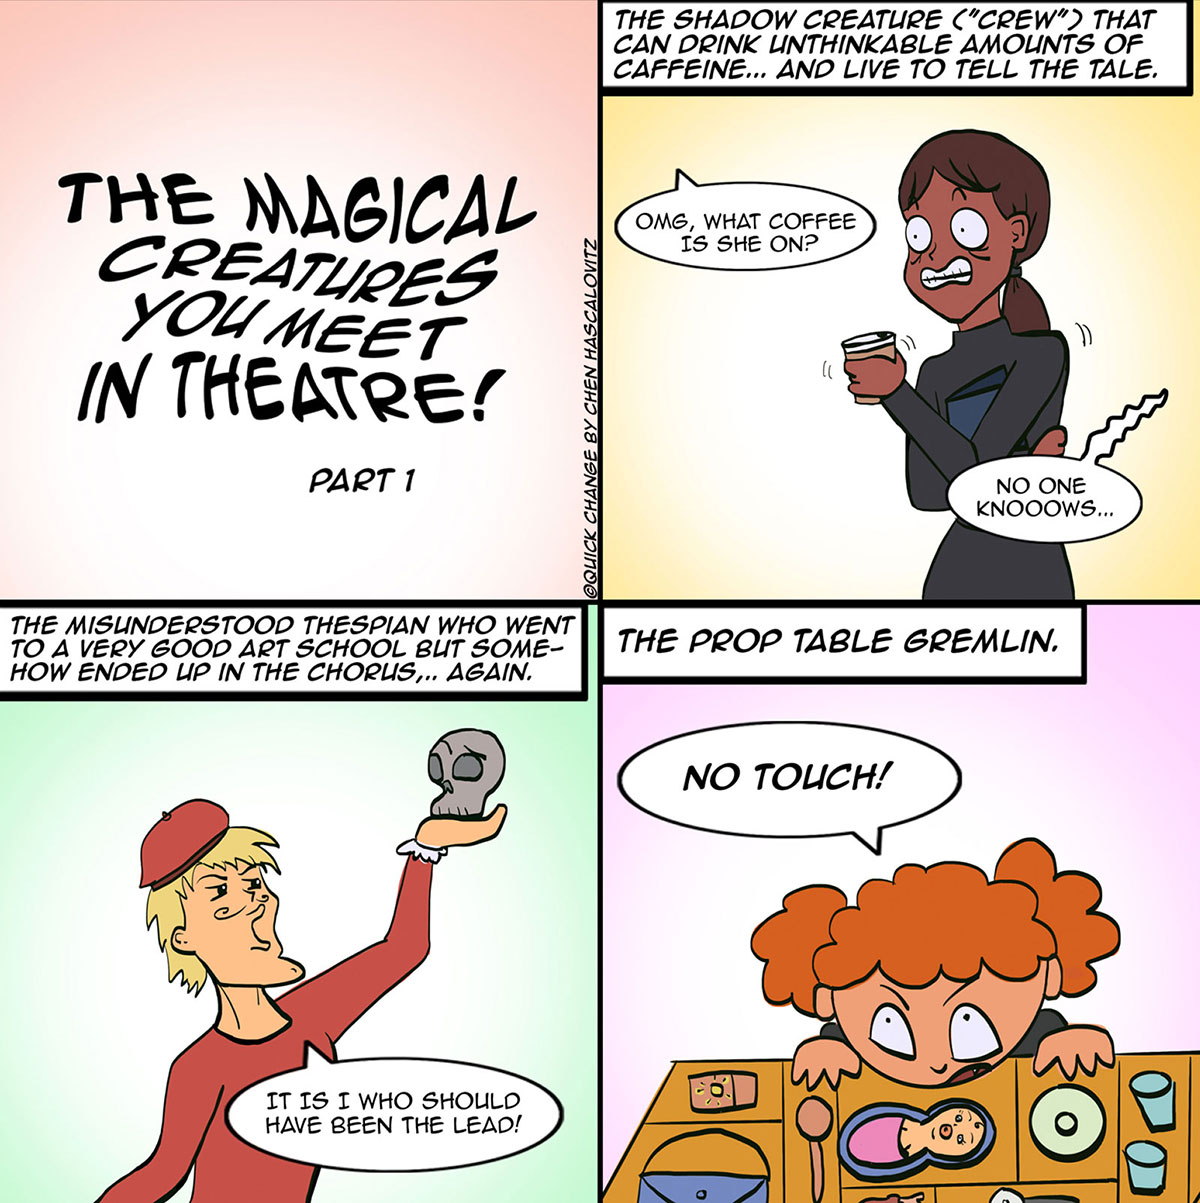 Four panel comic illustrating the magical creatures you meet in the theatre part 1